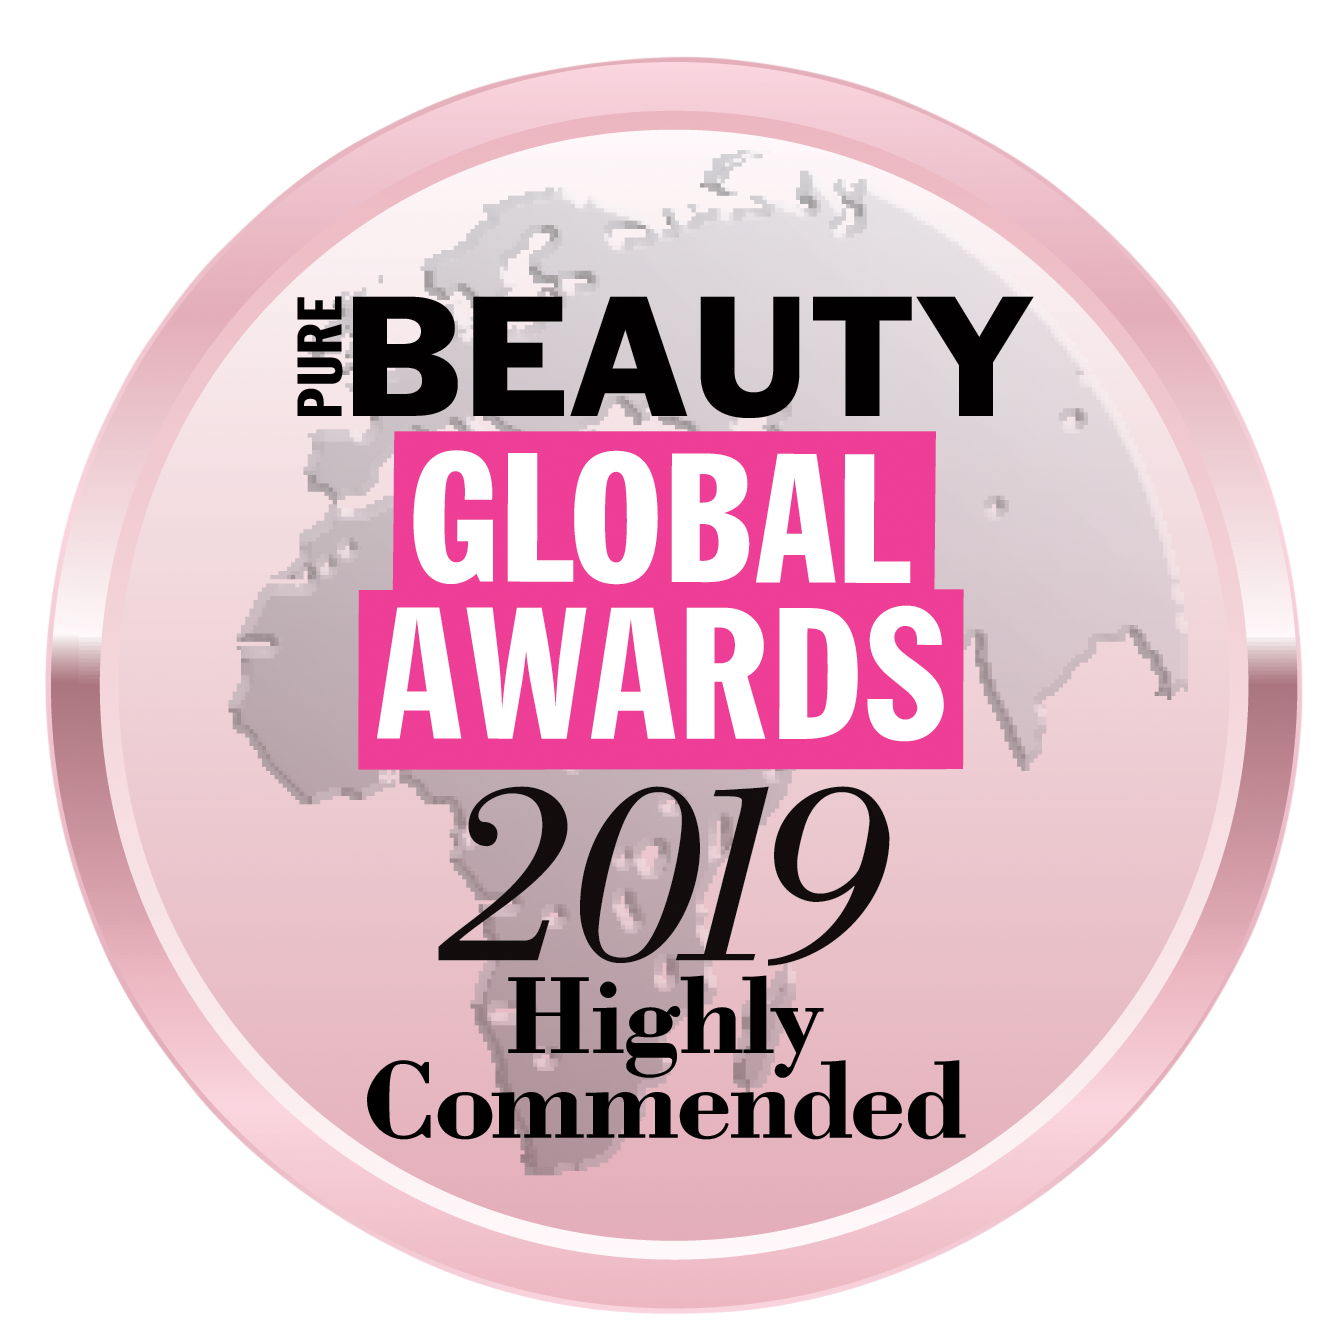 NO-GUNK-Natural-Hair-Wax-Organic-Styling-Funk-PURE-Beauty-Global-Awards-Best-Male-Hair-Product-2018